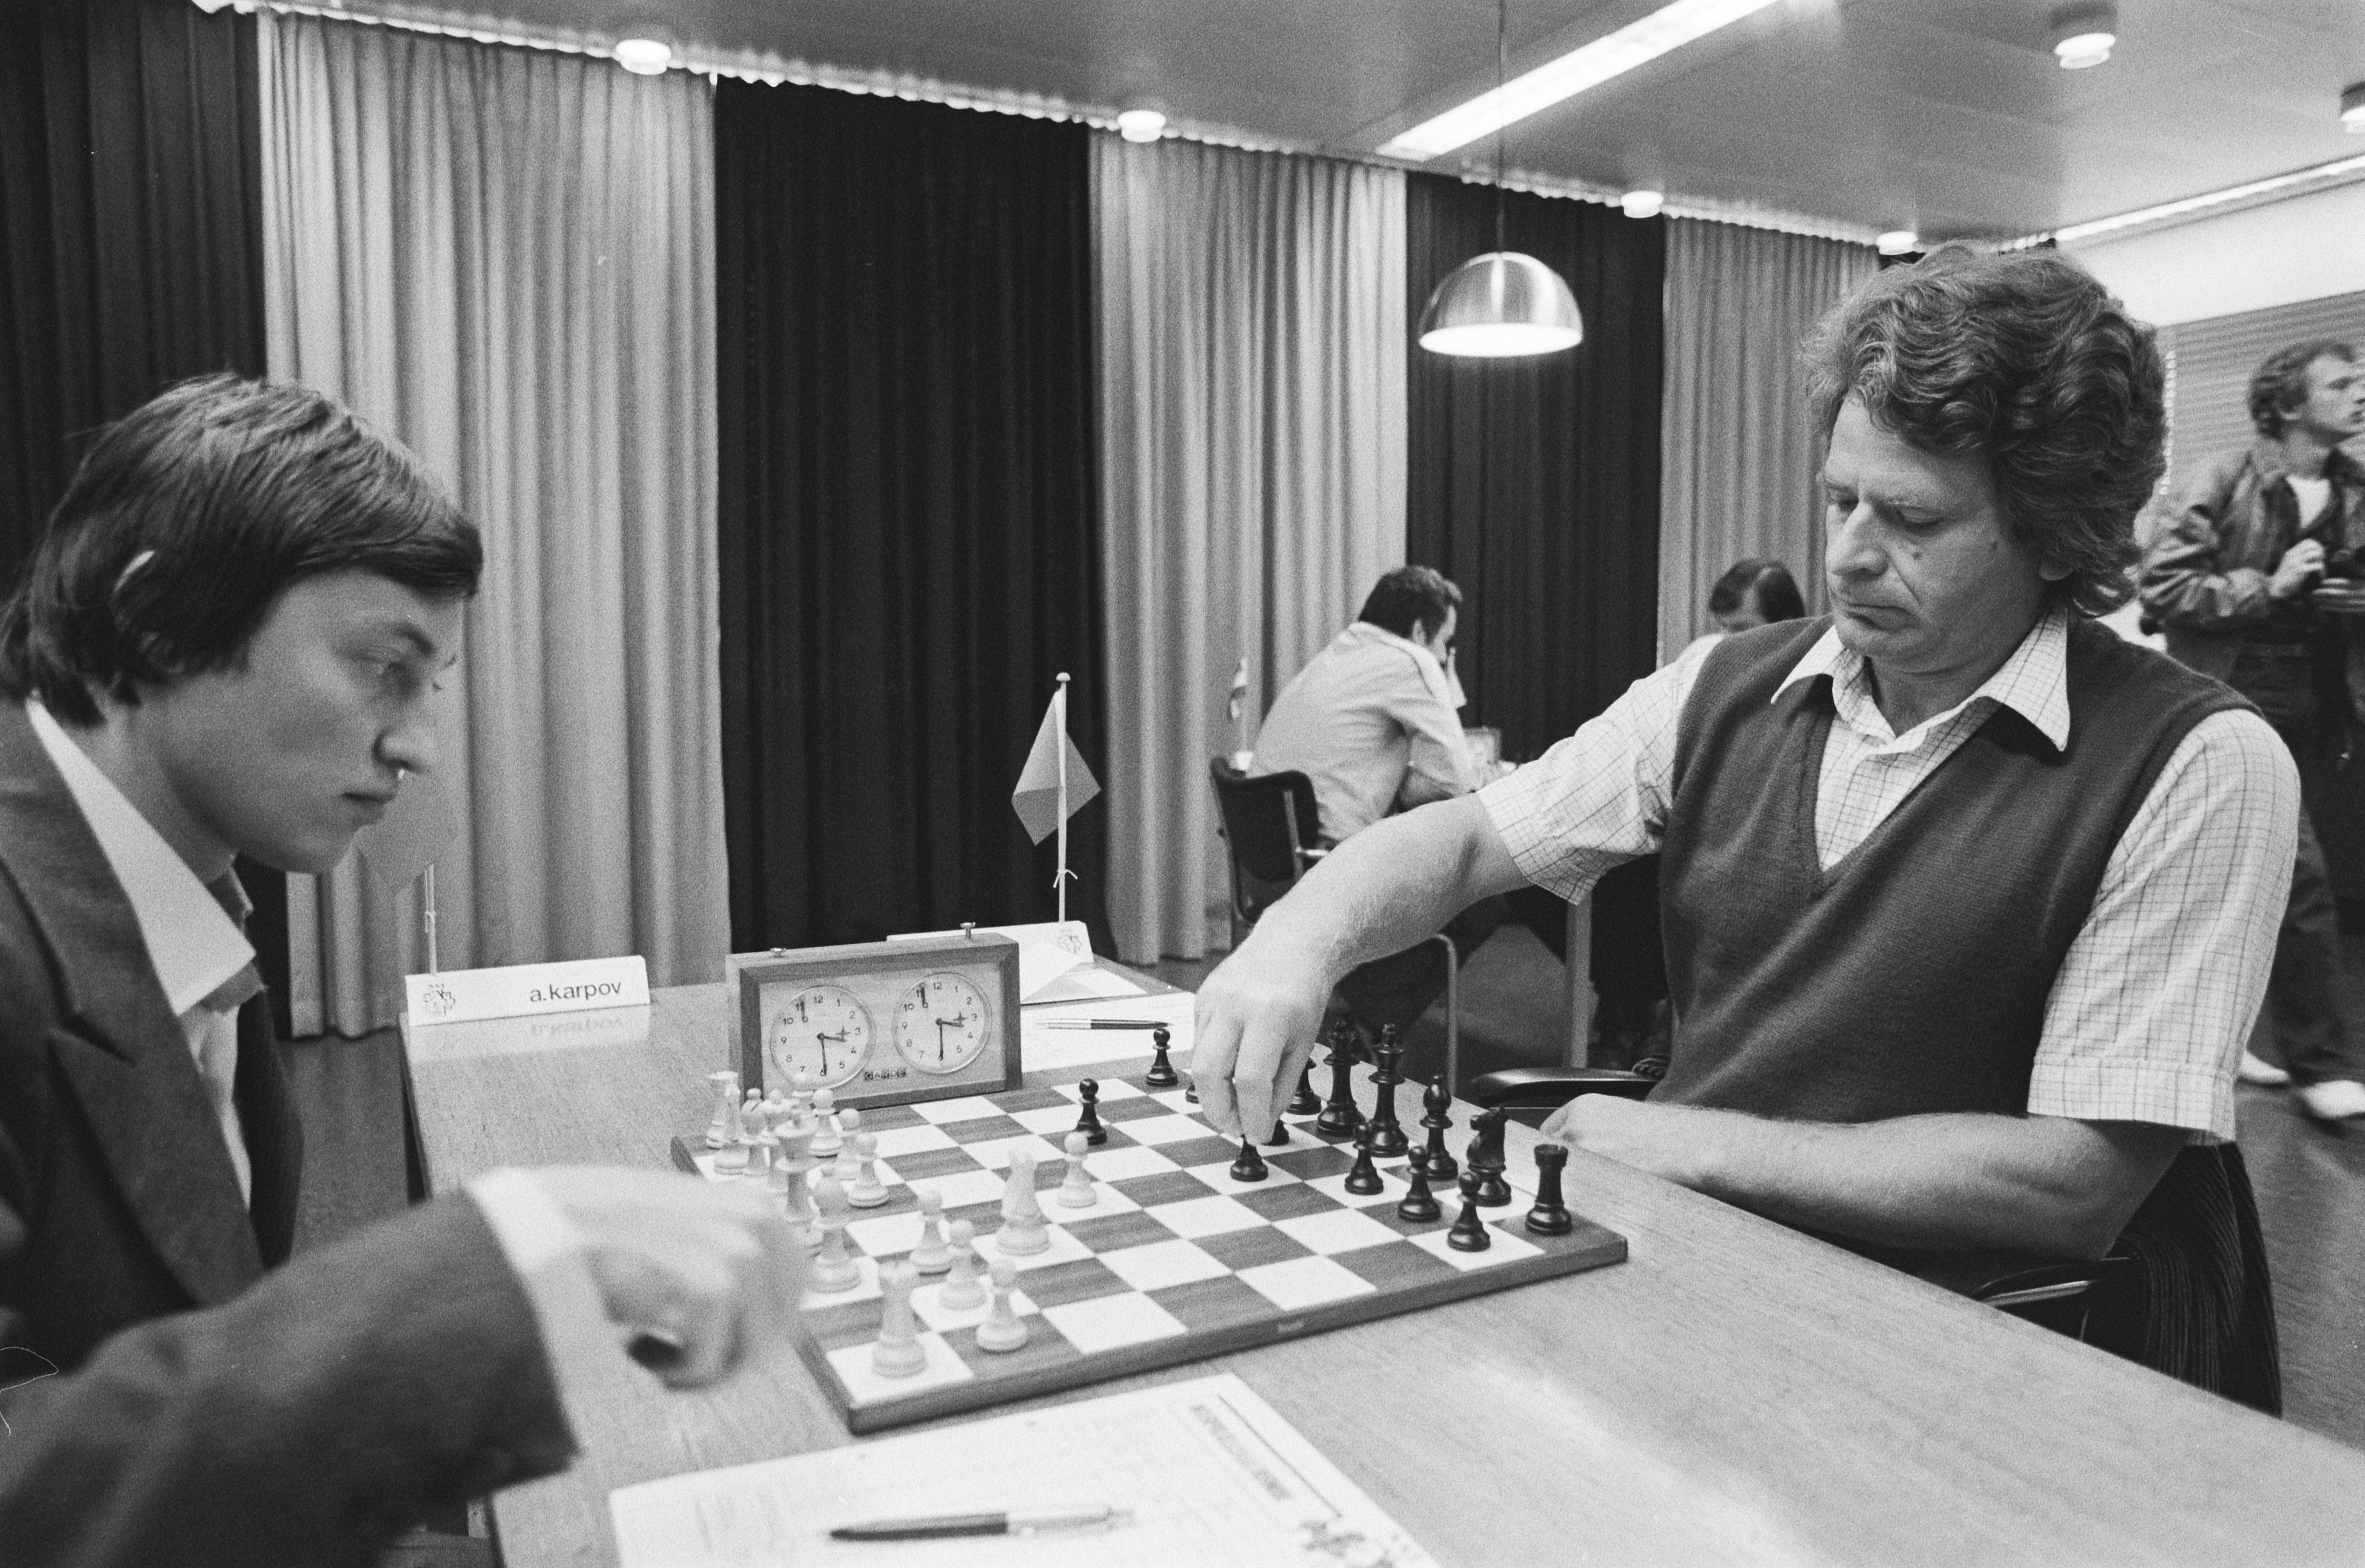 Anatoly Karpov's 'Selected Games 1969-1977' & '100 Victorious